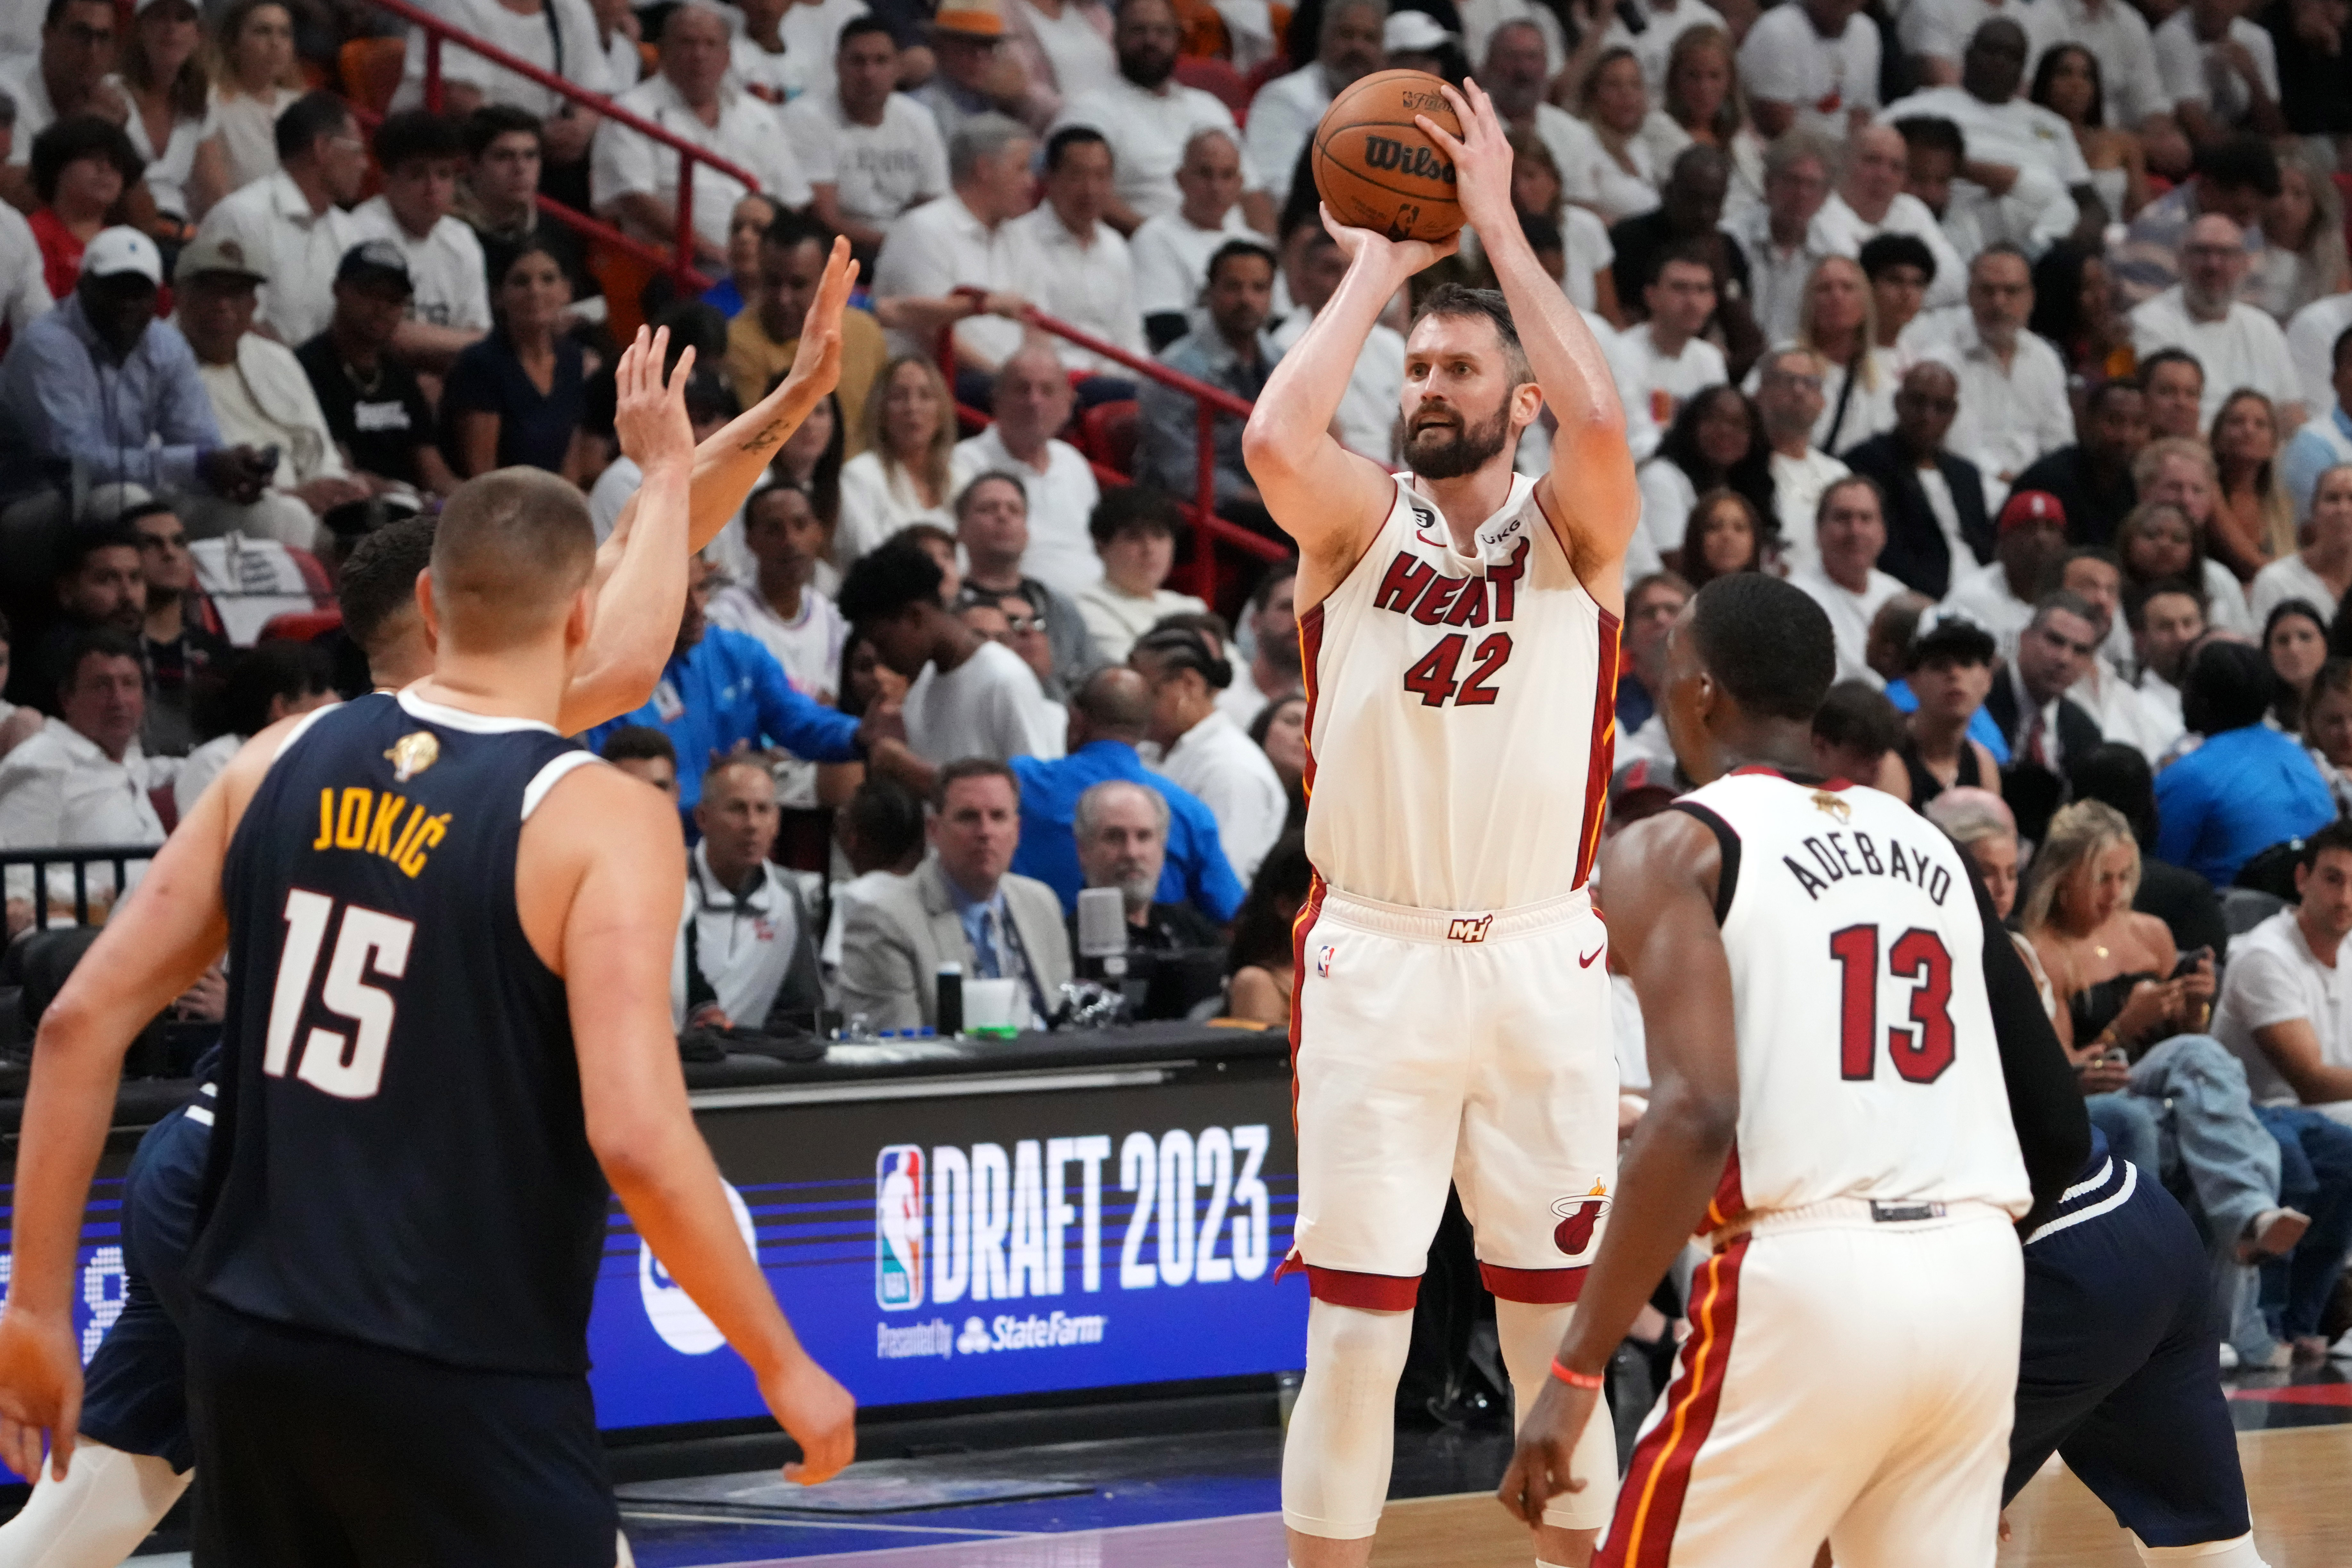 Miami Heat forward Kevin Love (42) shoots the ball against the Denver Nuggets during the third quarter in game four of the 2023 NBA Finals at Kaseya Center.